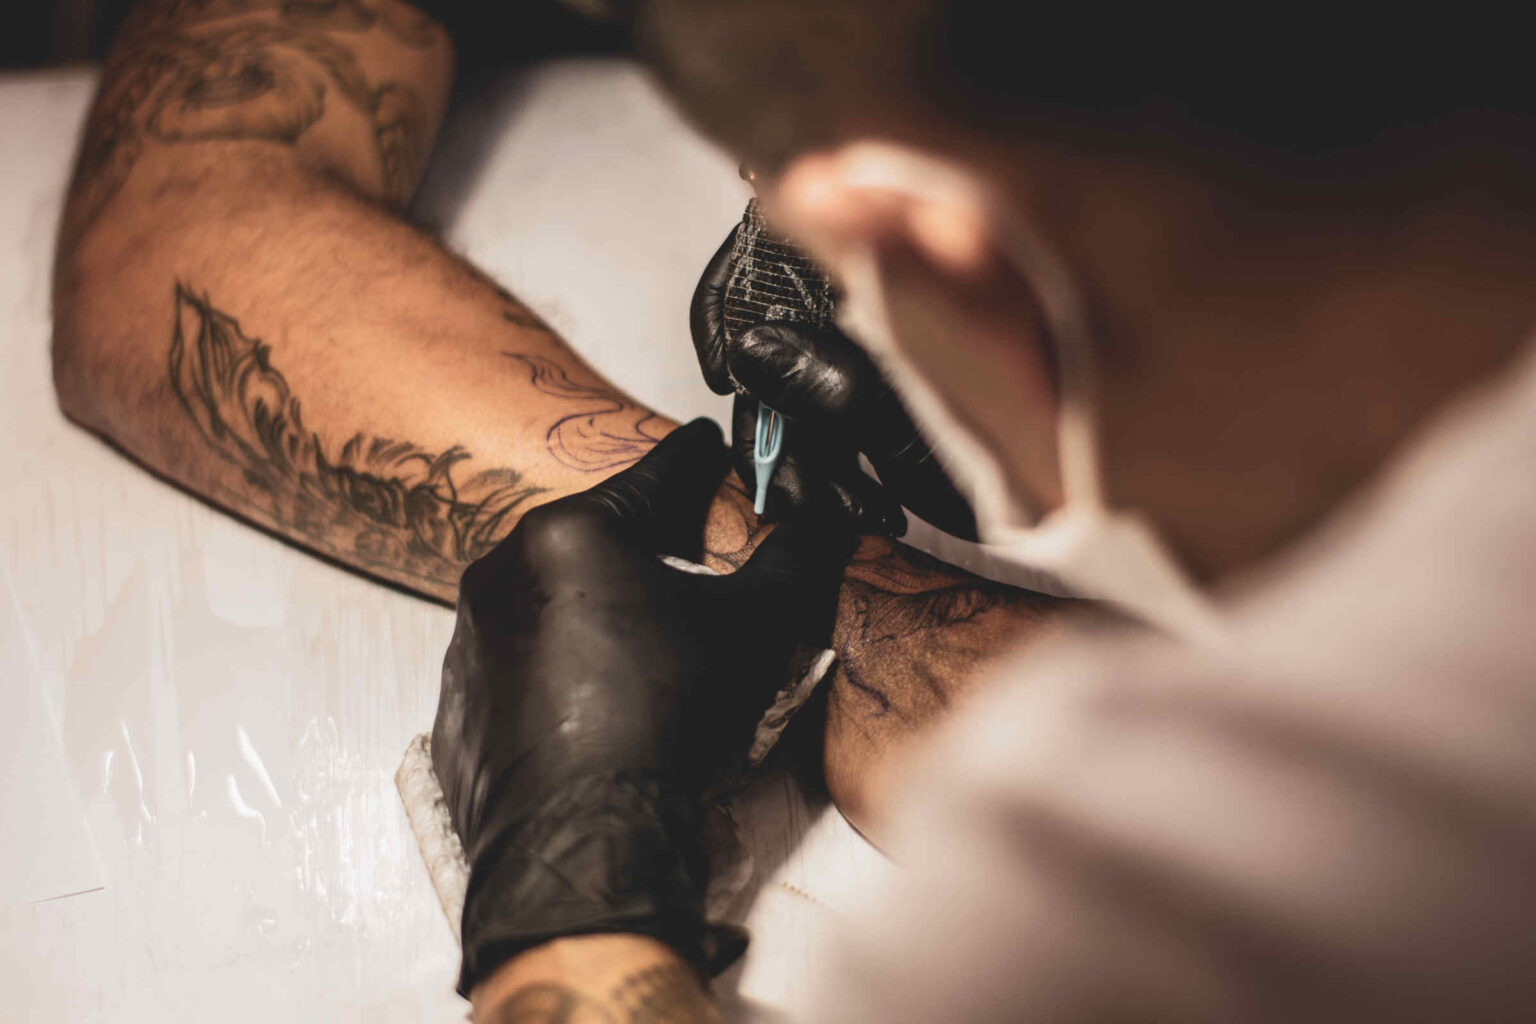 From picking a design to finding an artist, it can be overwhelming to get a tattoo. Follow these steps to take the pain out of getting inked!